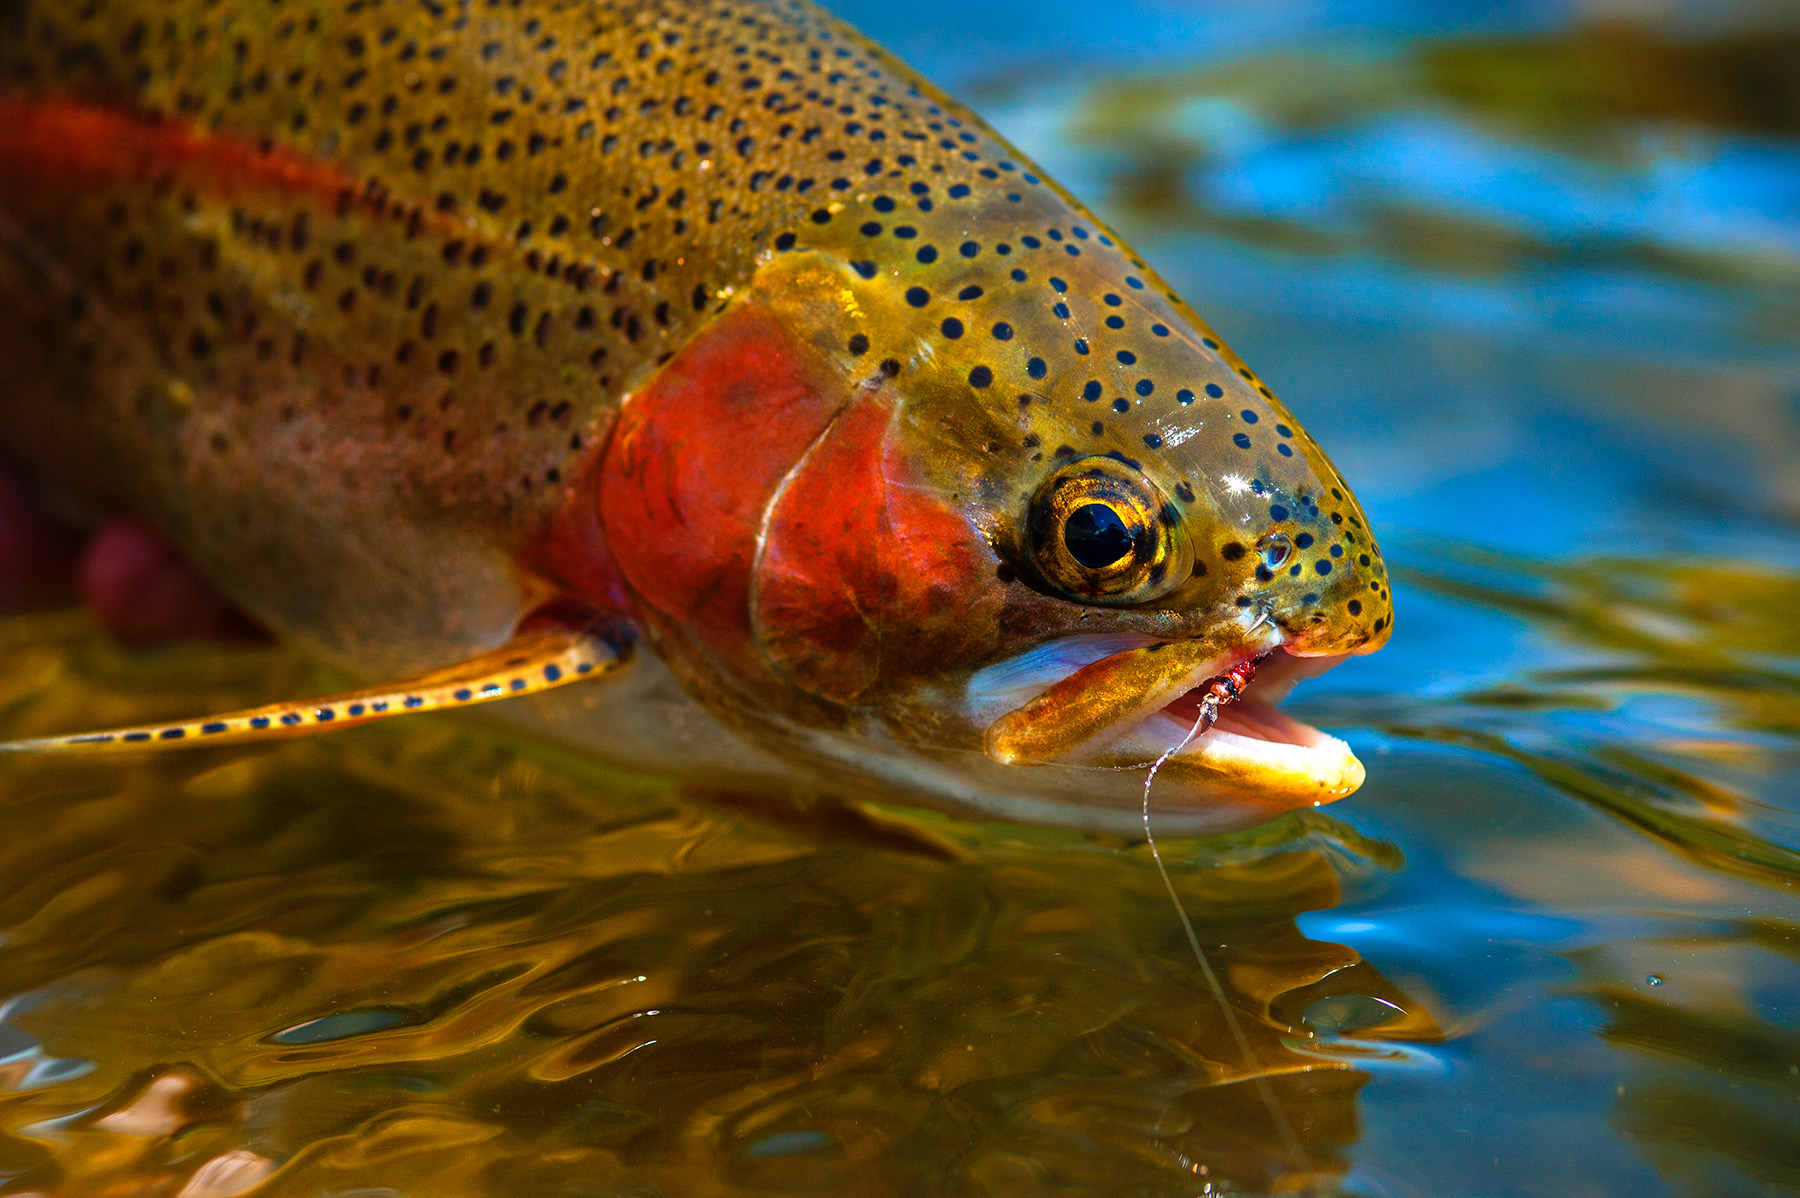 Brown Trout, Western Montana Fish Species